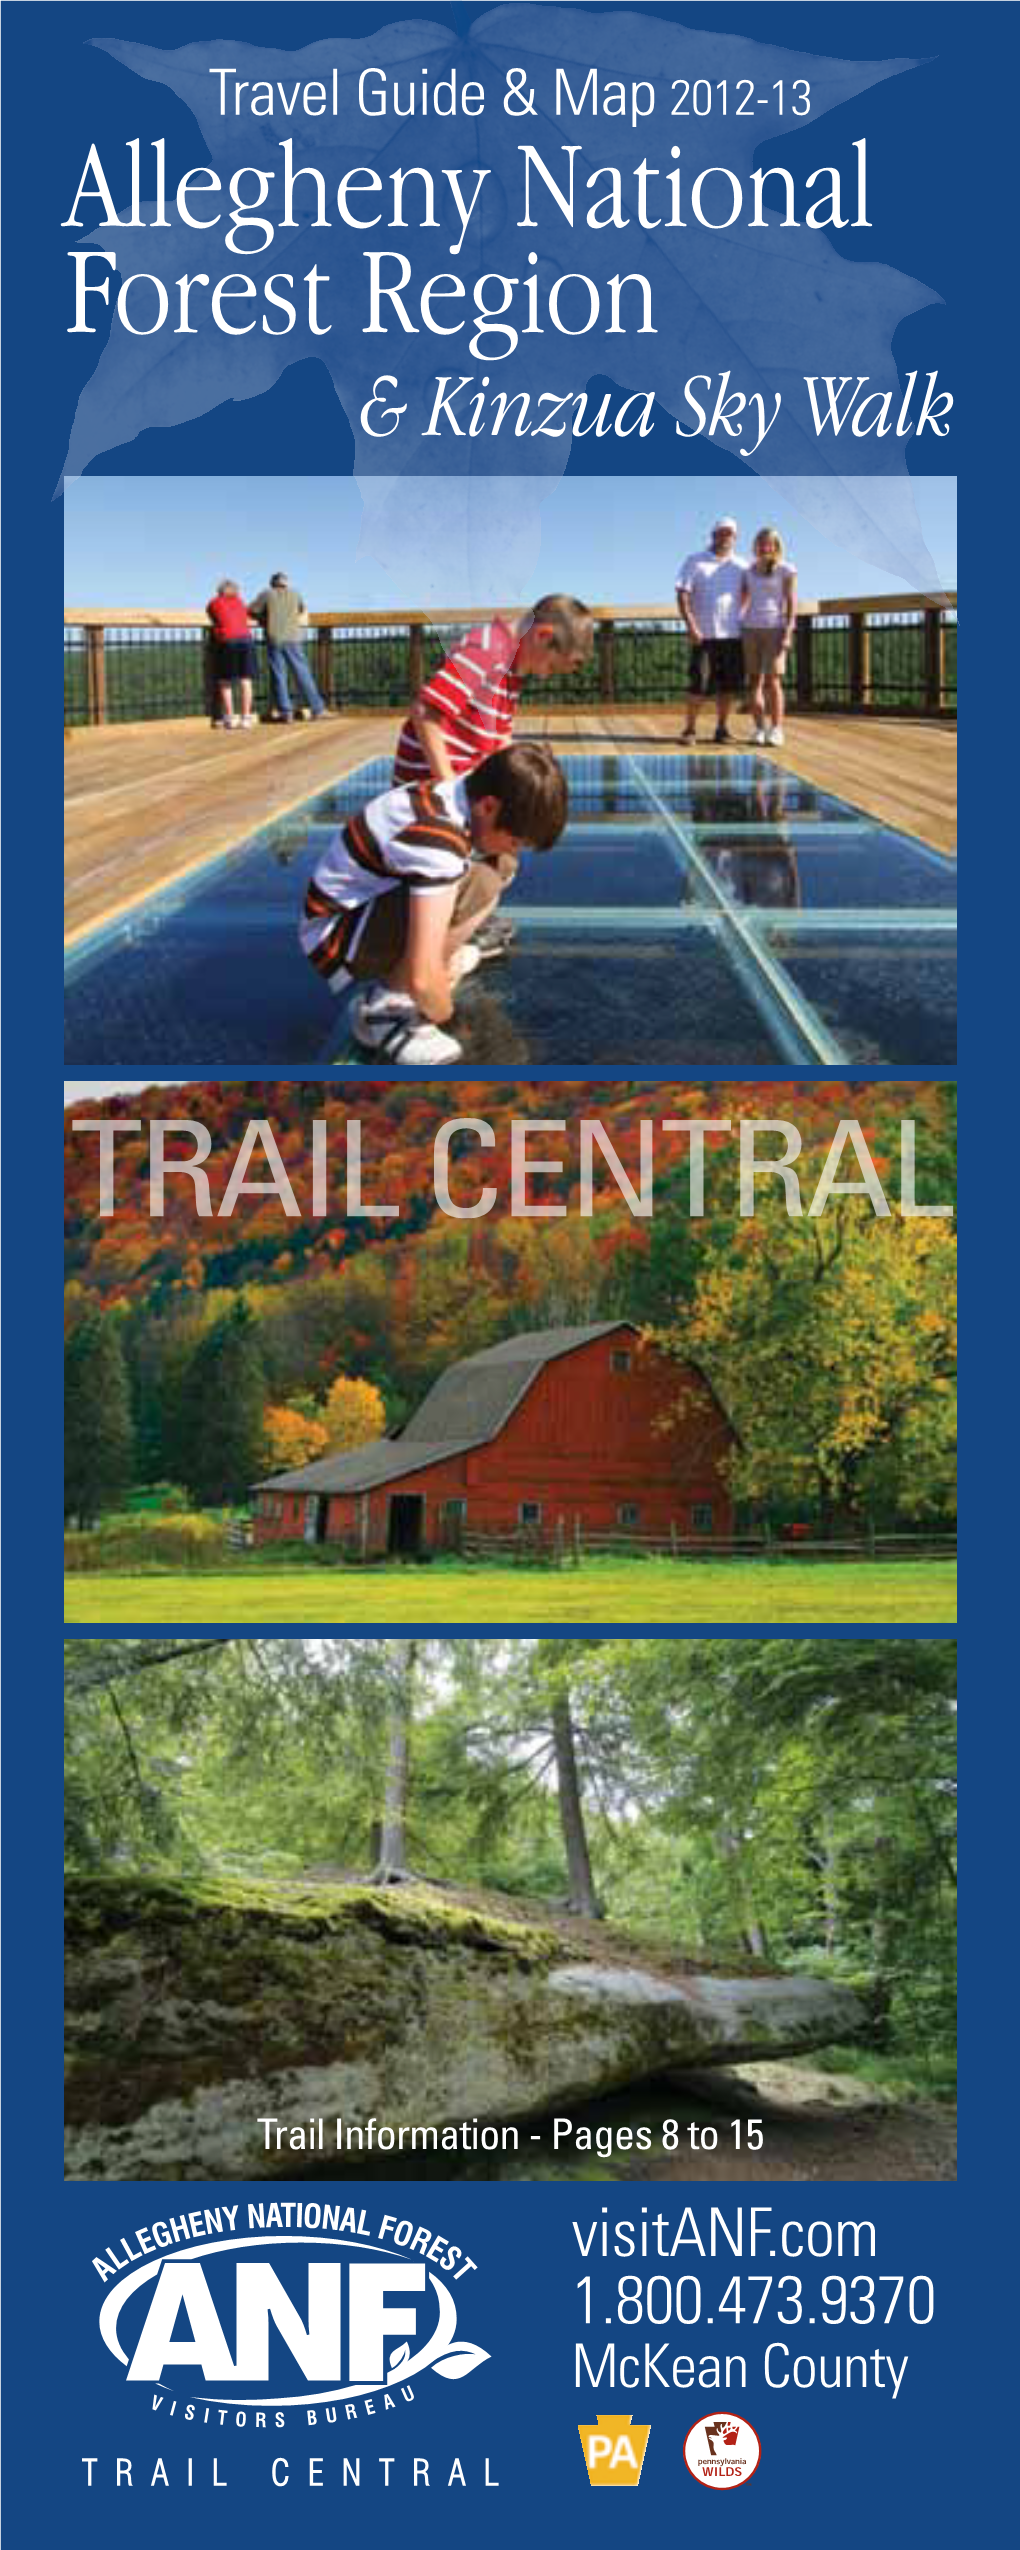 Trail Central